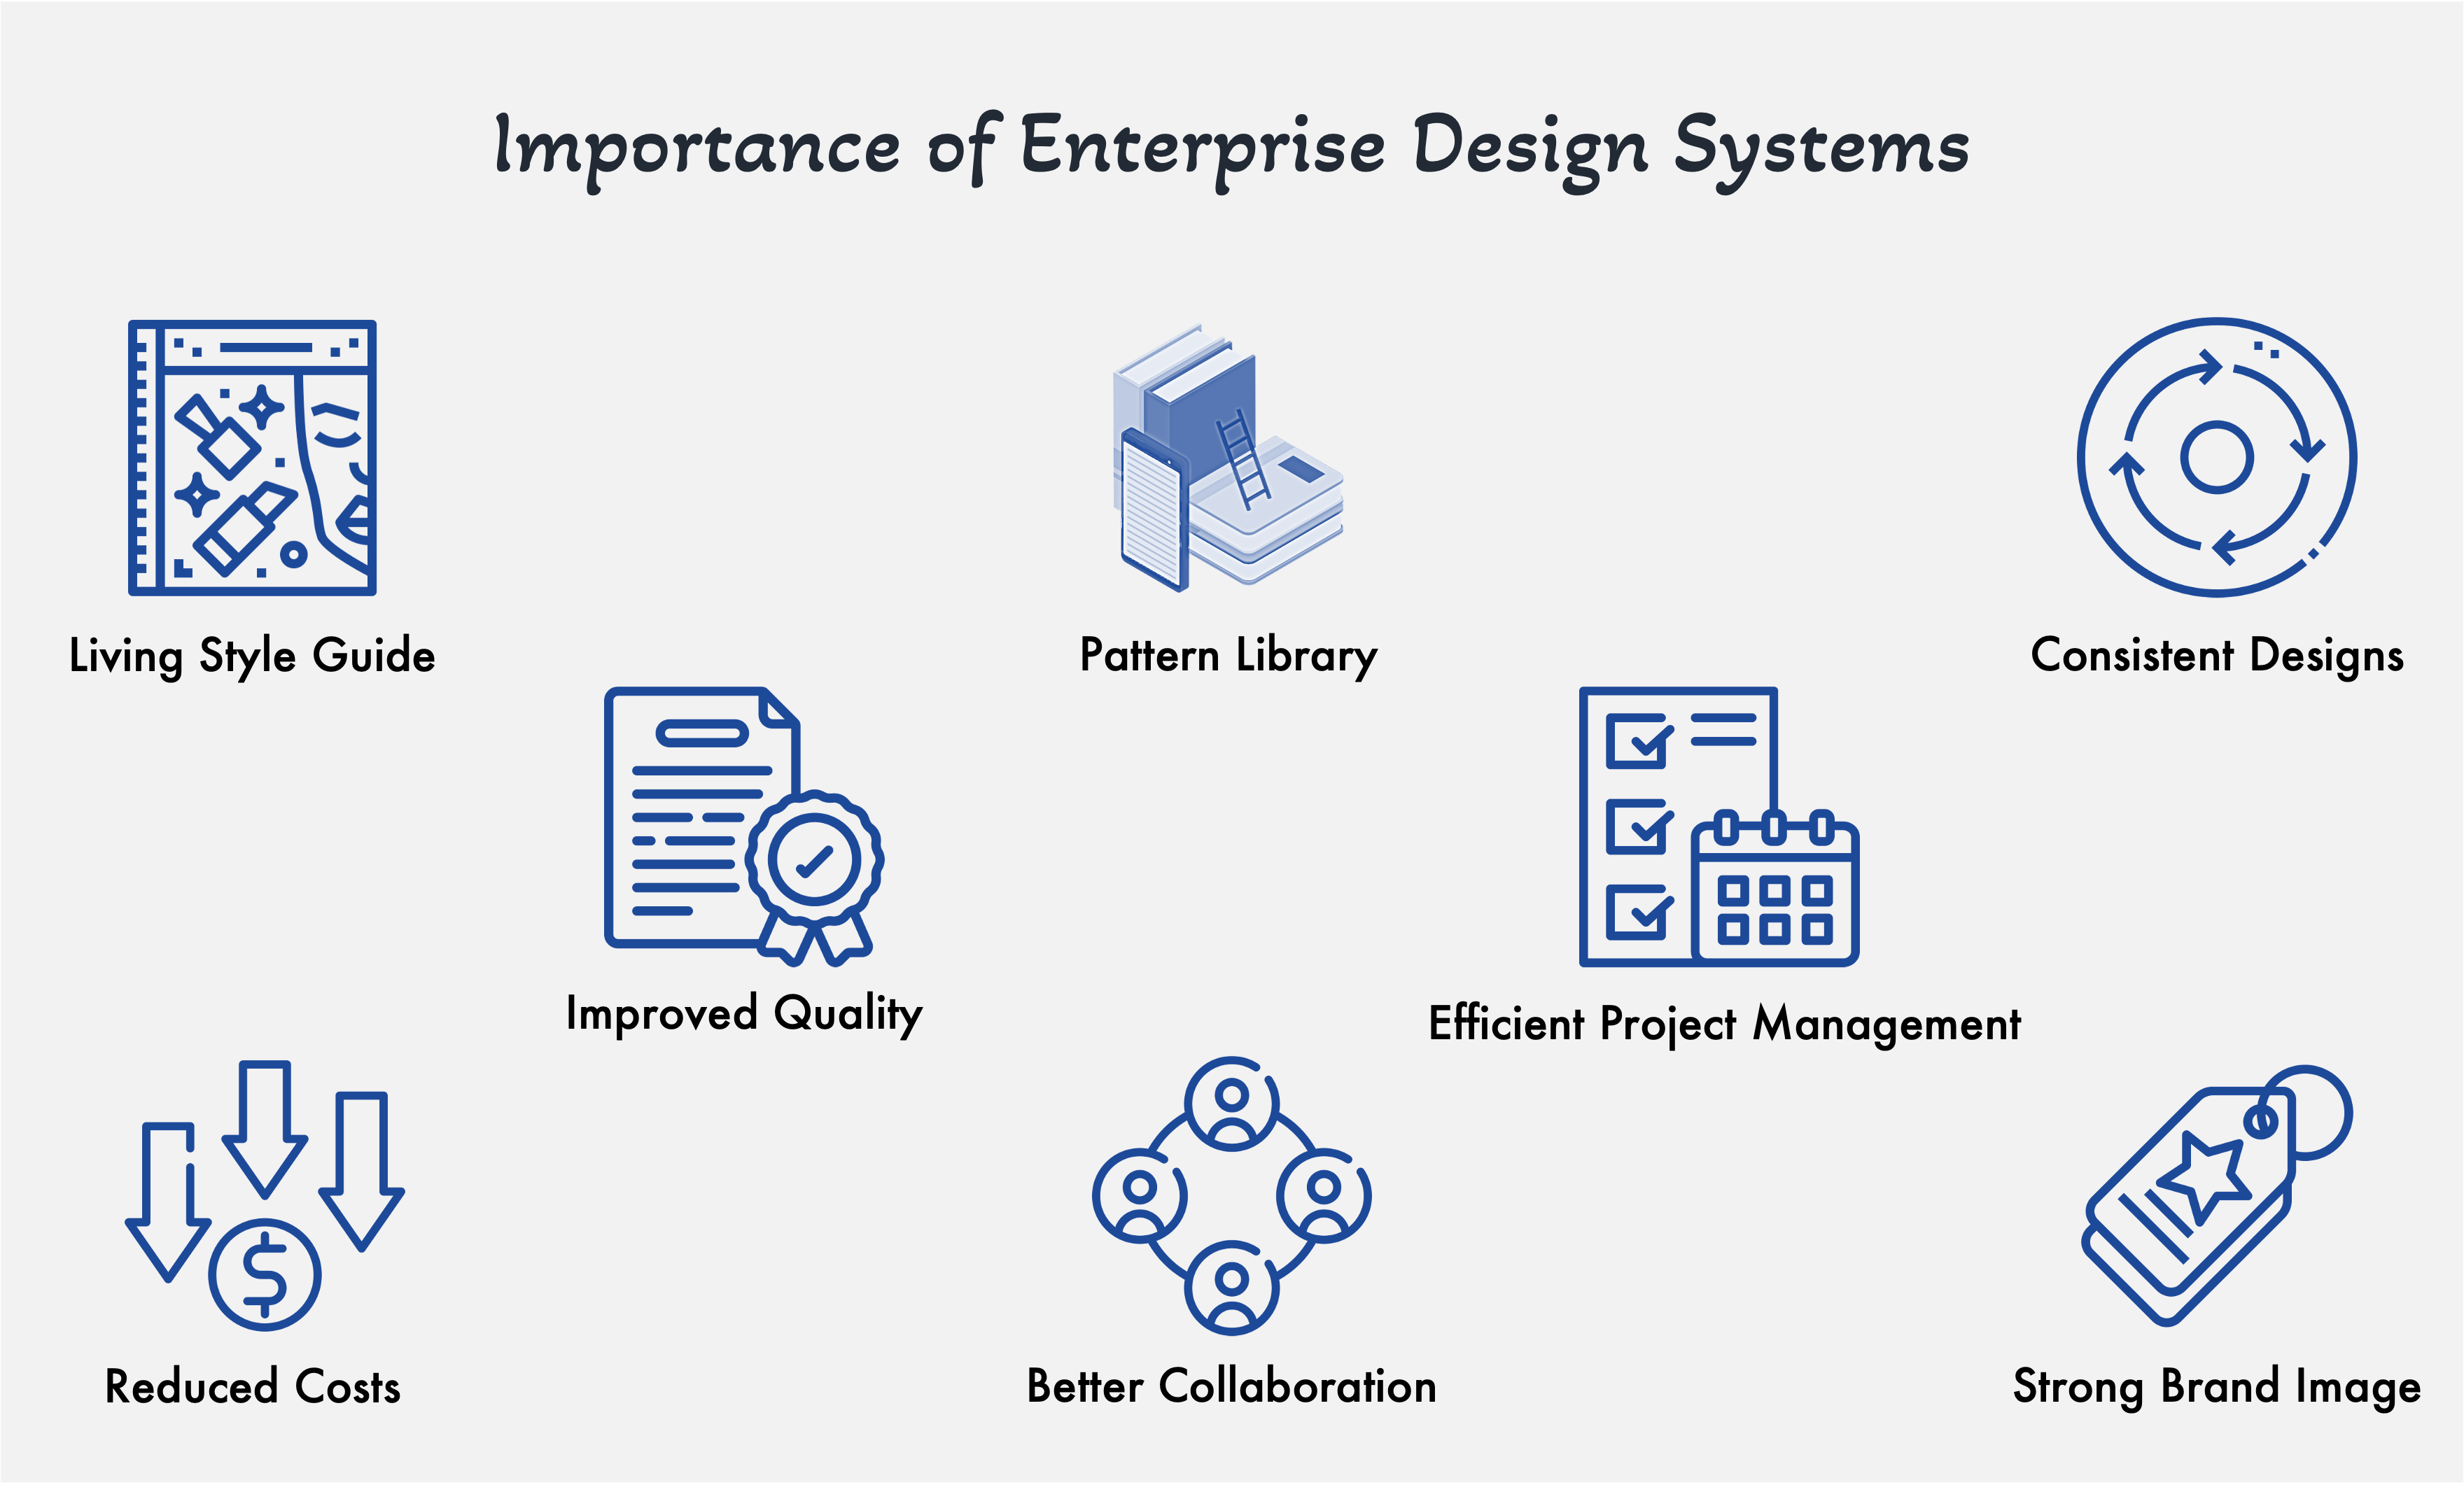 The Importance of Enterprise Design Systems